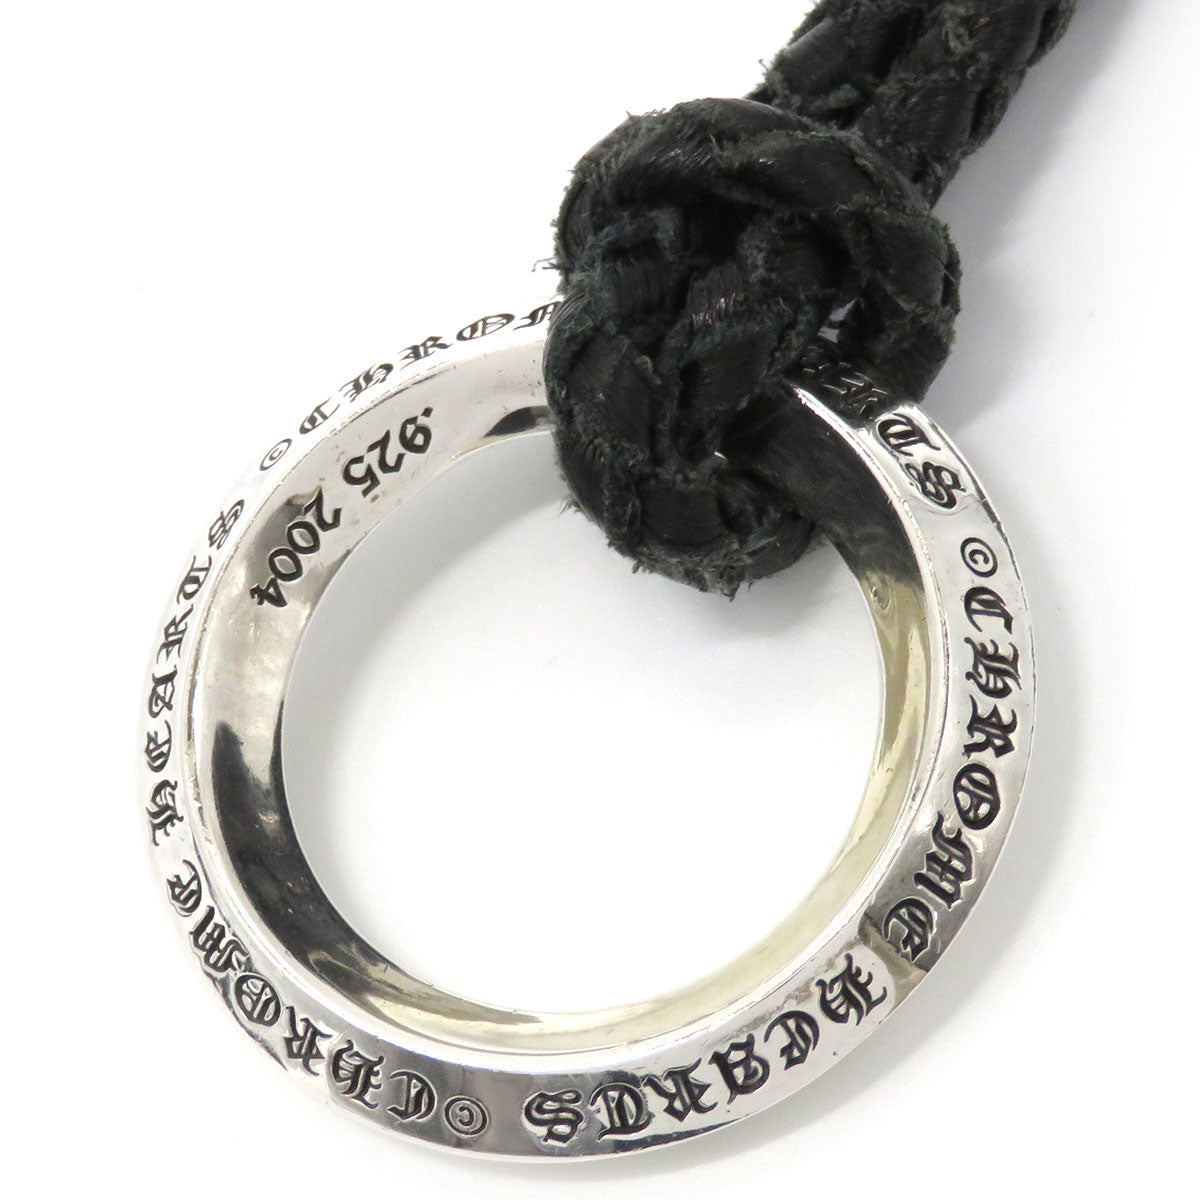 Spacer Ring Pendant Necklace